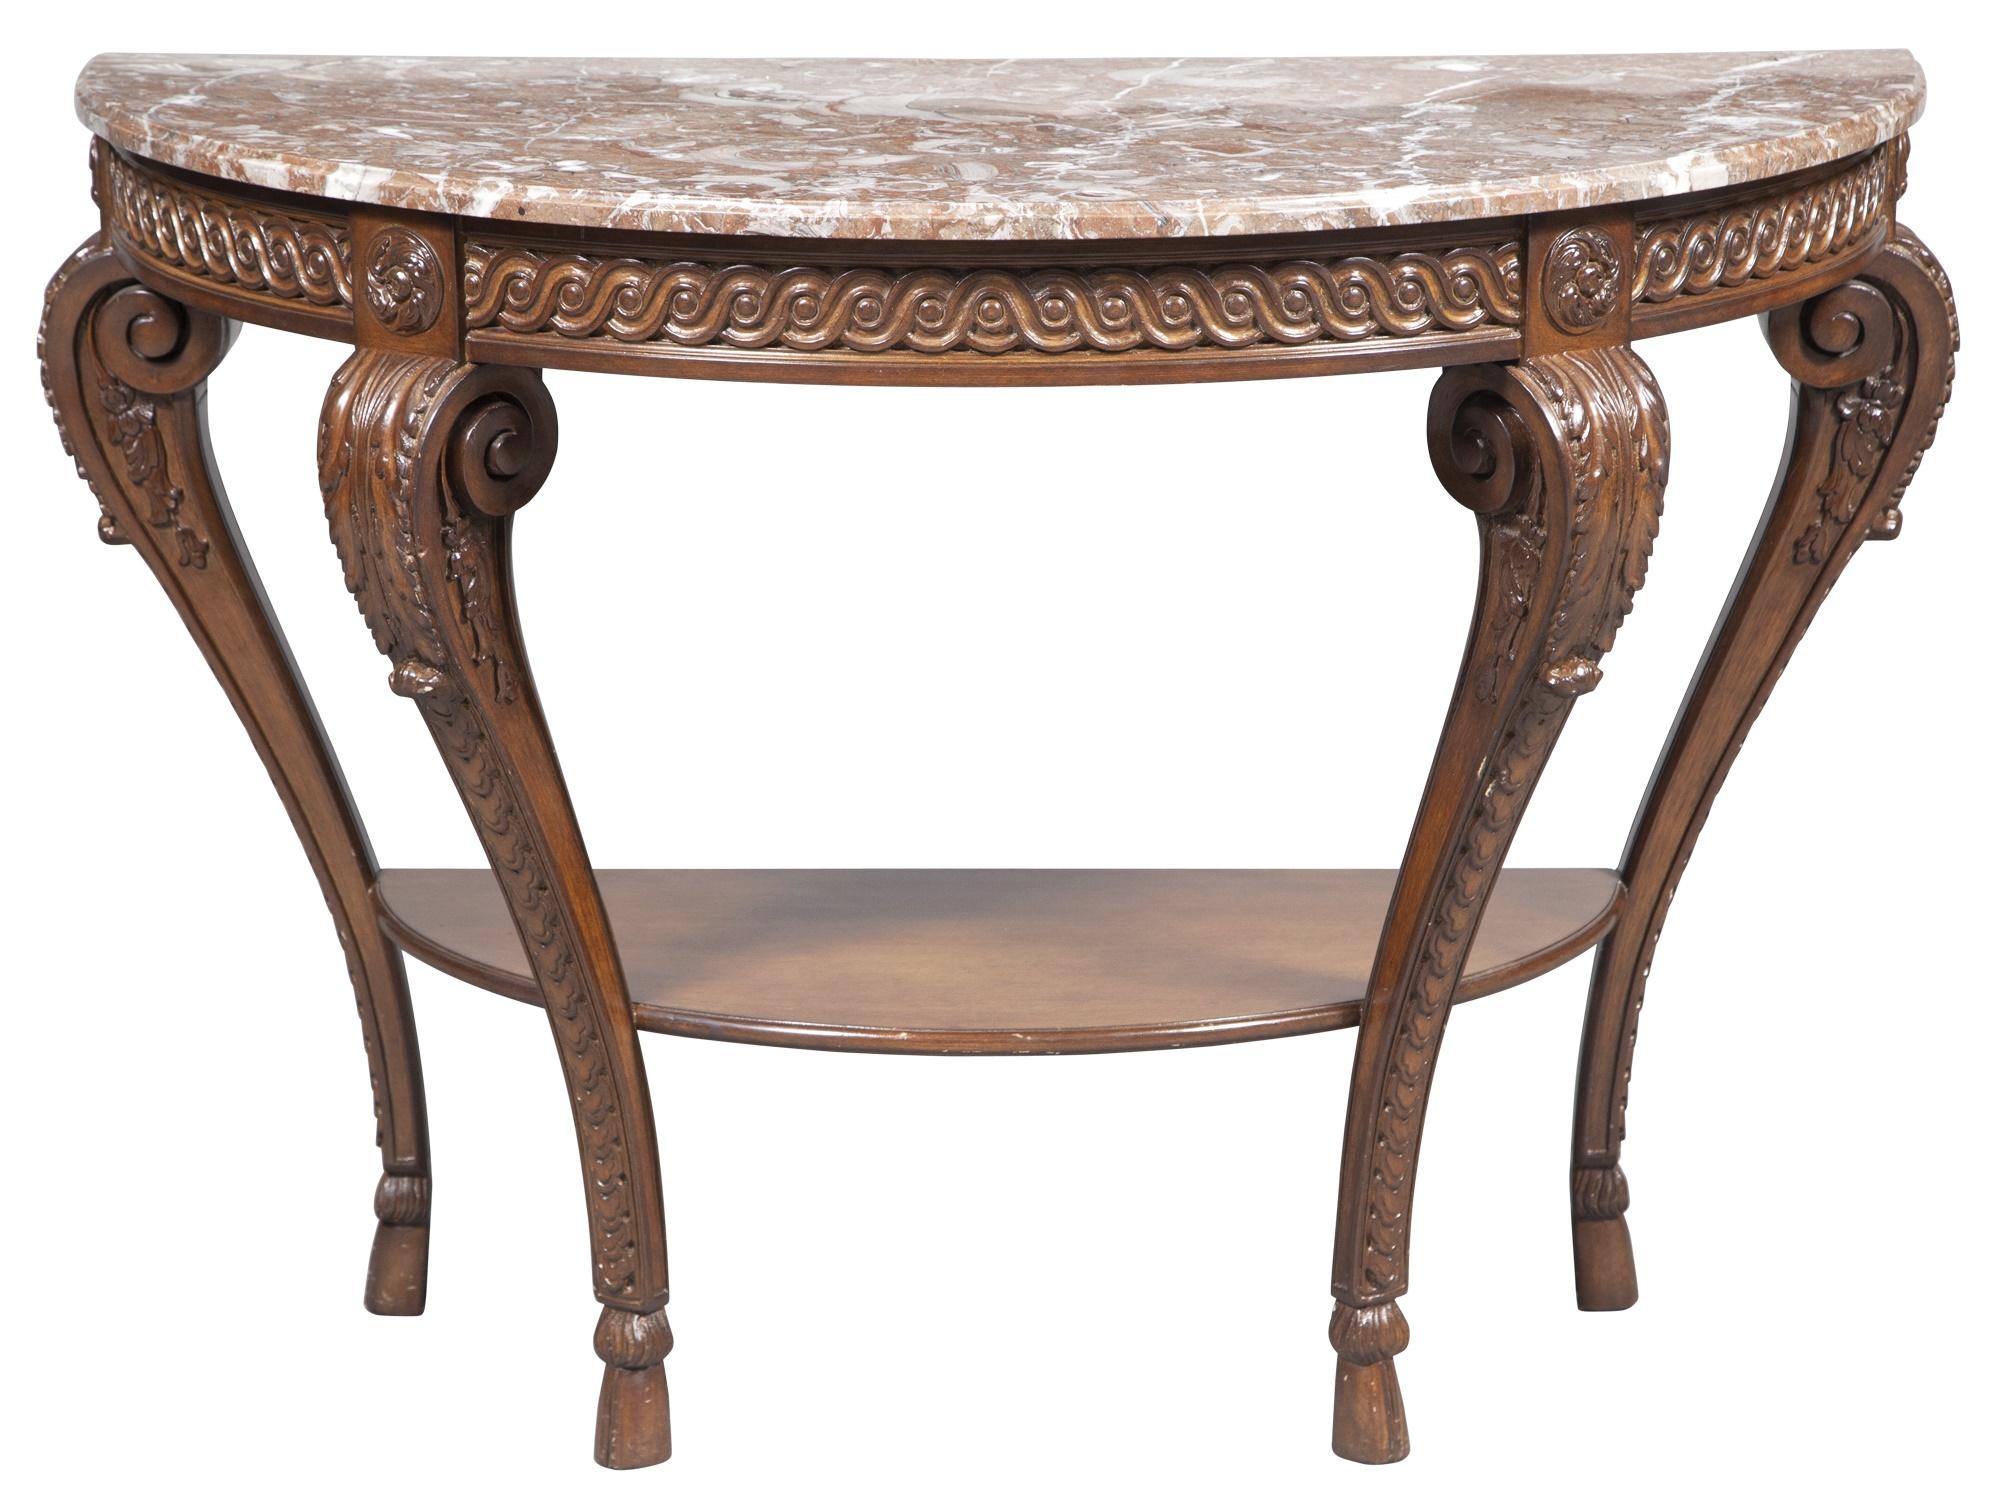  Louis XVI Style Walnut Framed Marble Top Demilune Console Table For Sale 2